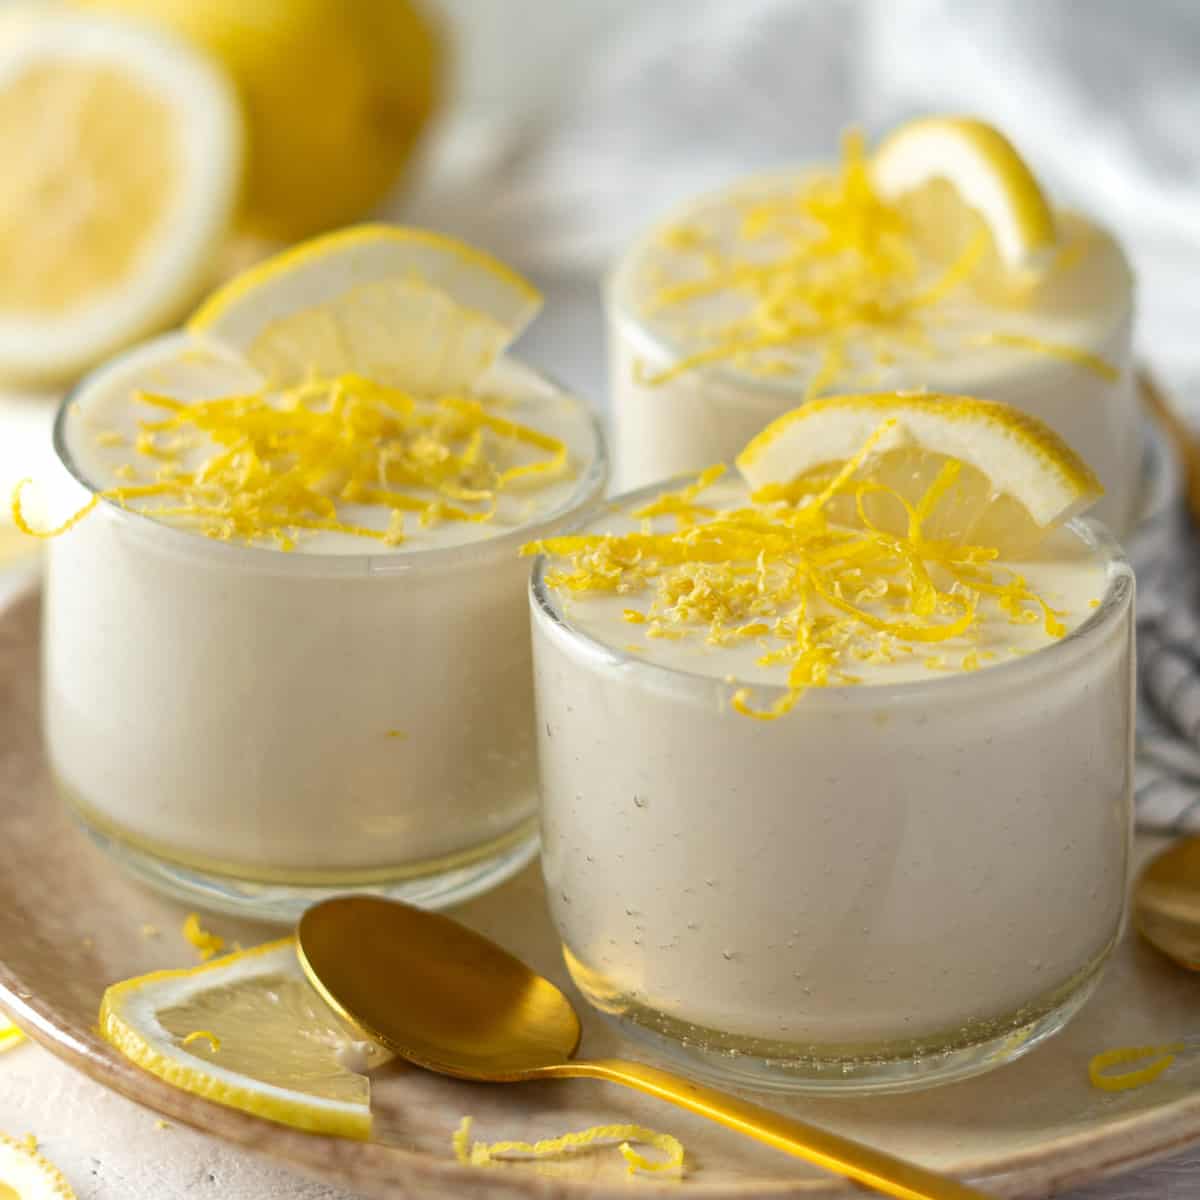 Lemon Mousse - Creamy, Dreamy, and so Delicious!